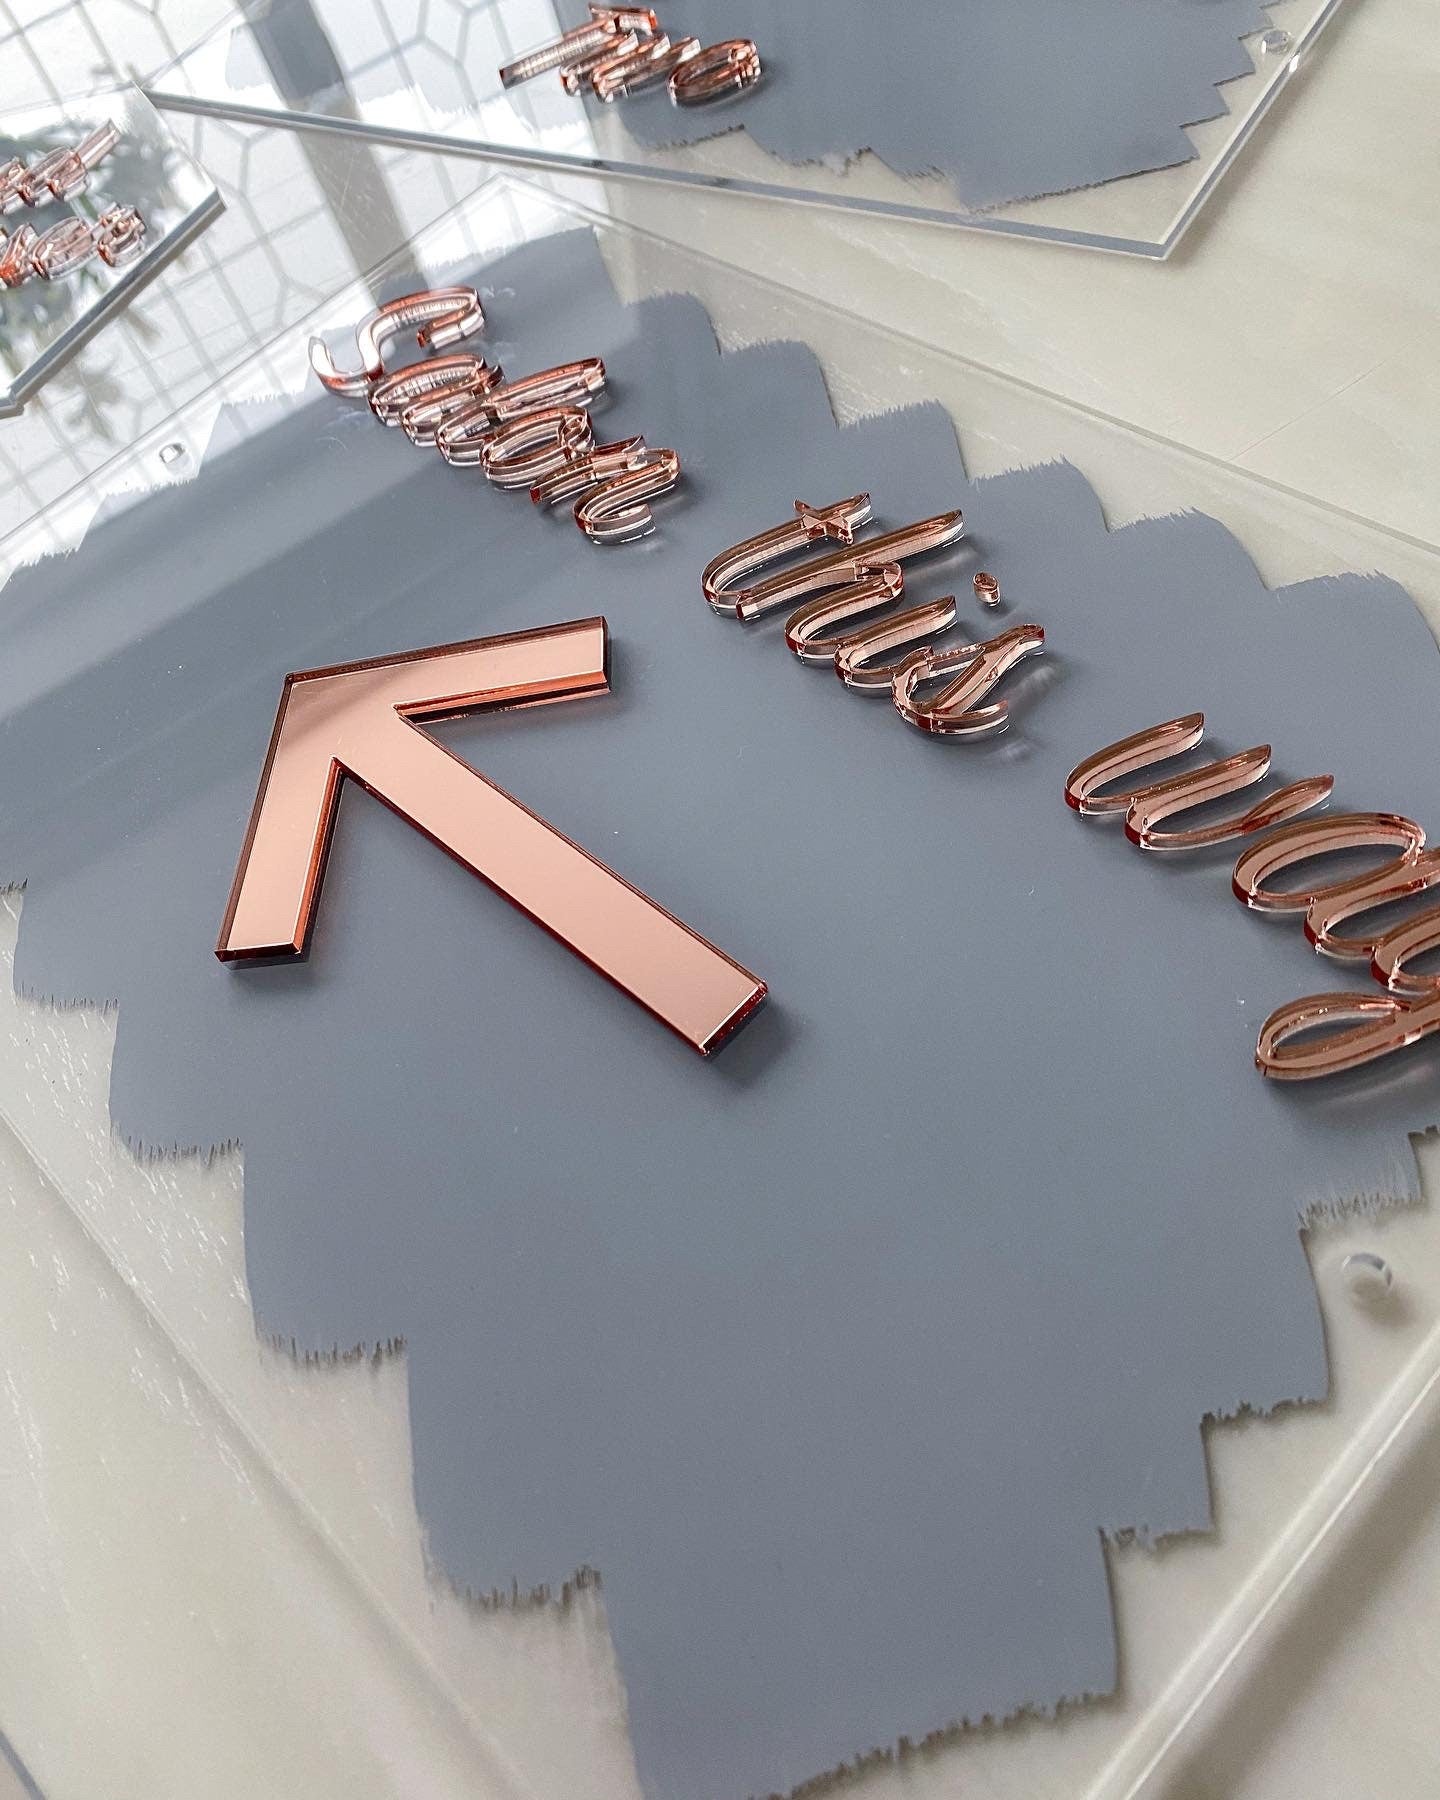 Acrylic business sign | room signs with painted back